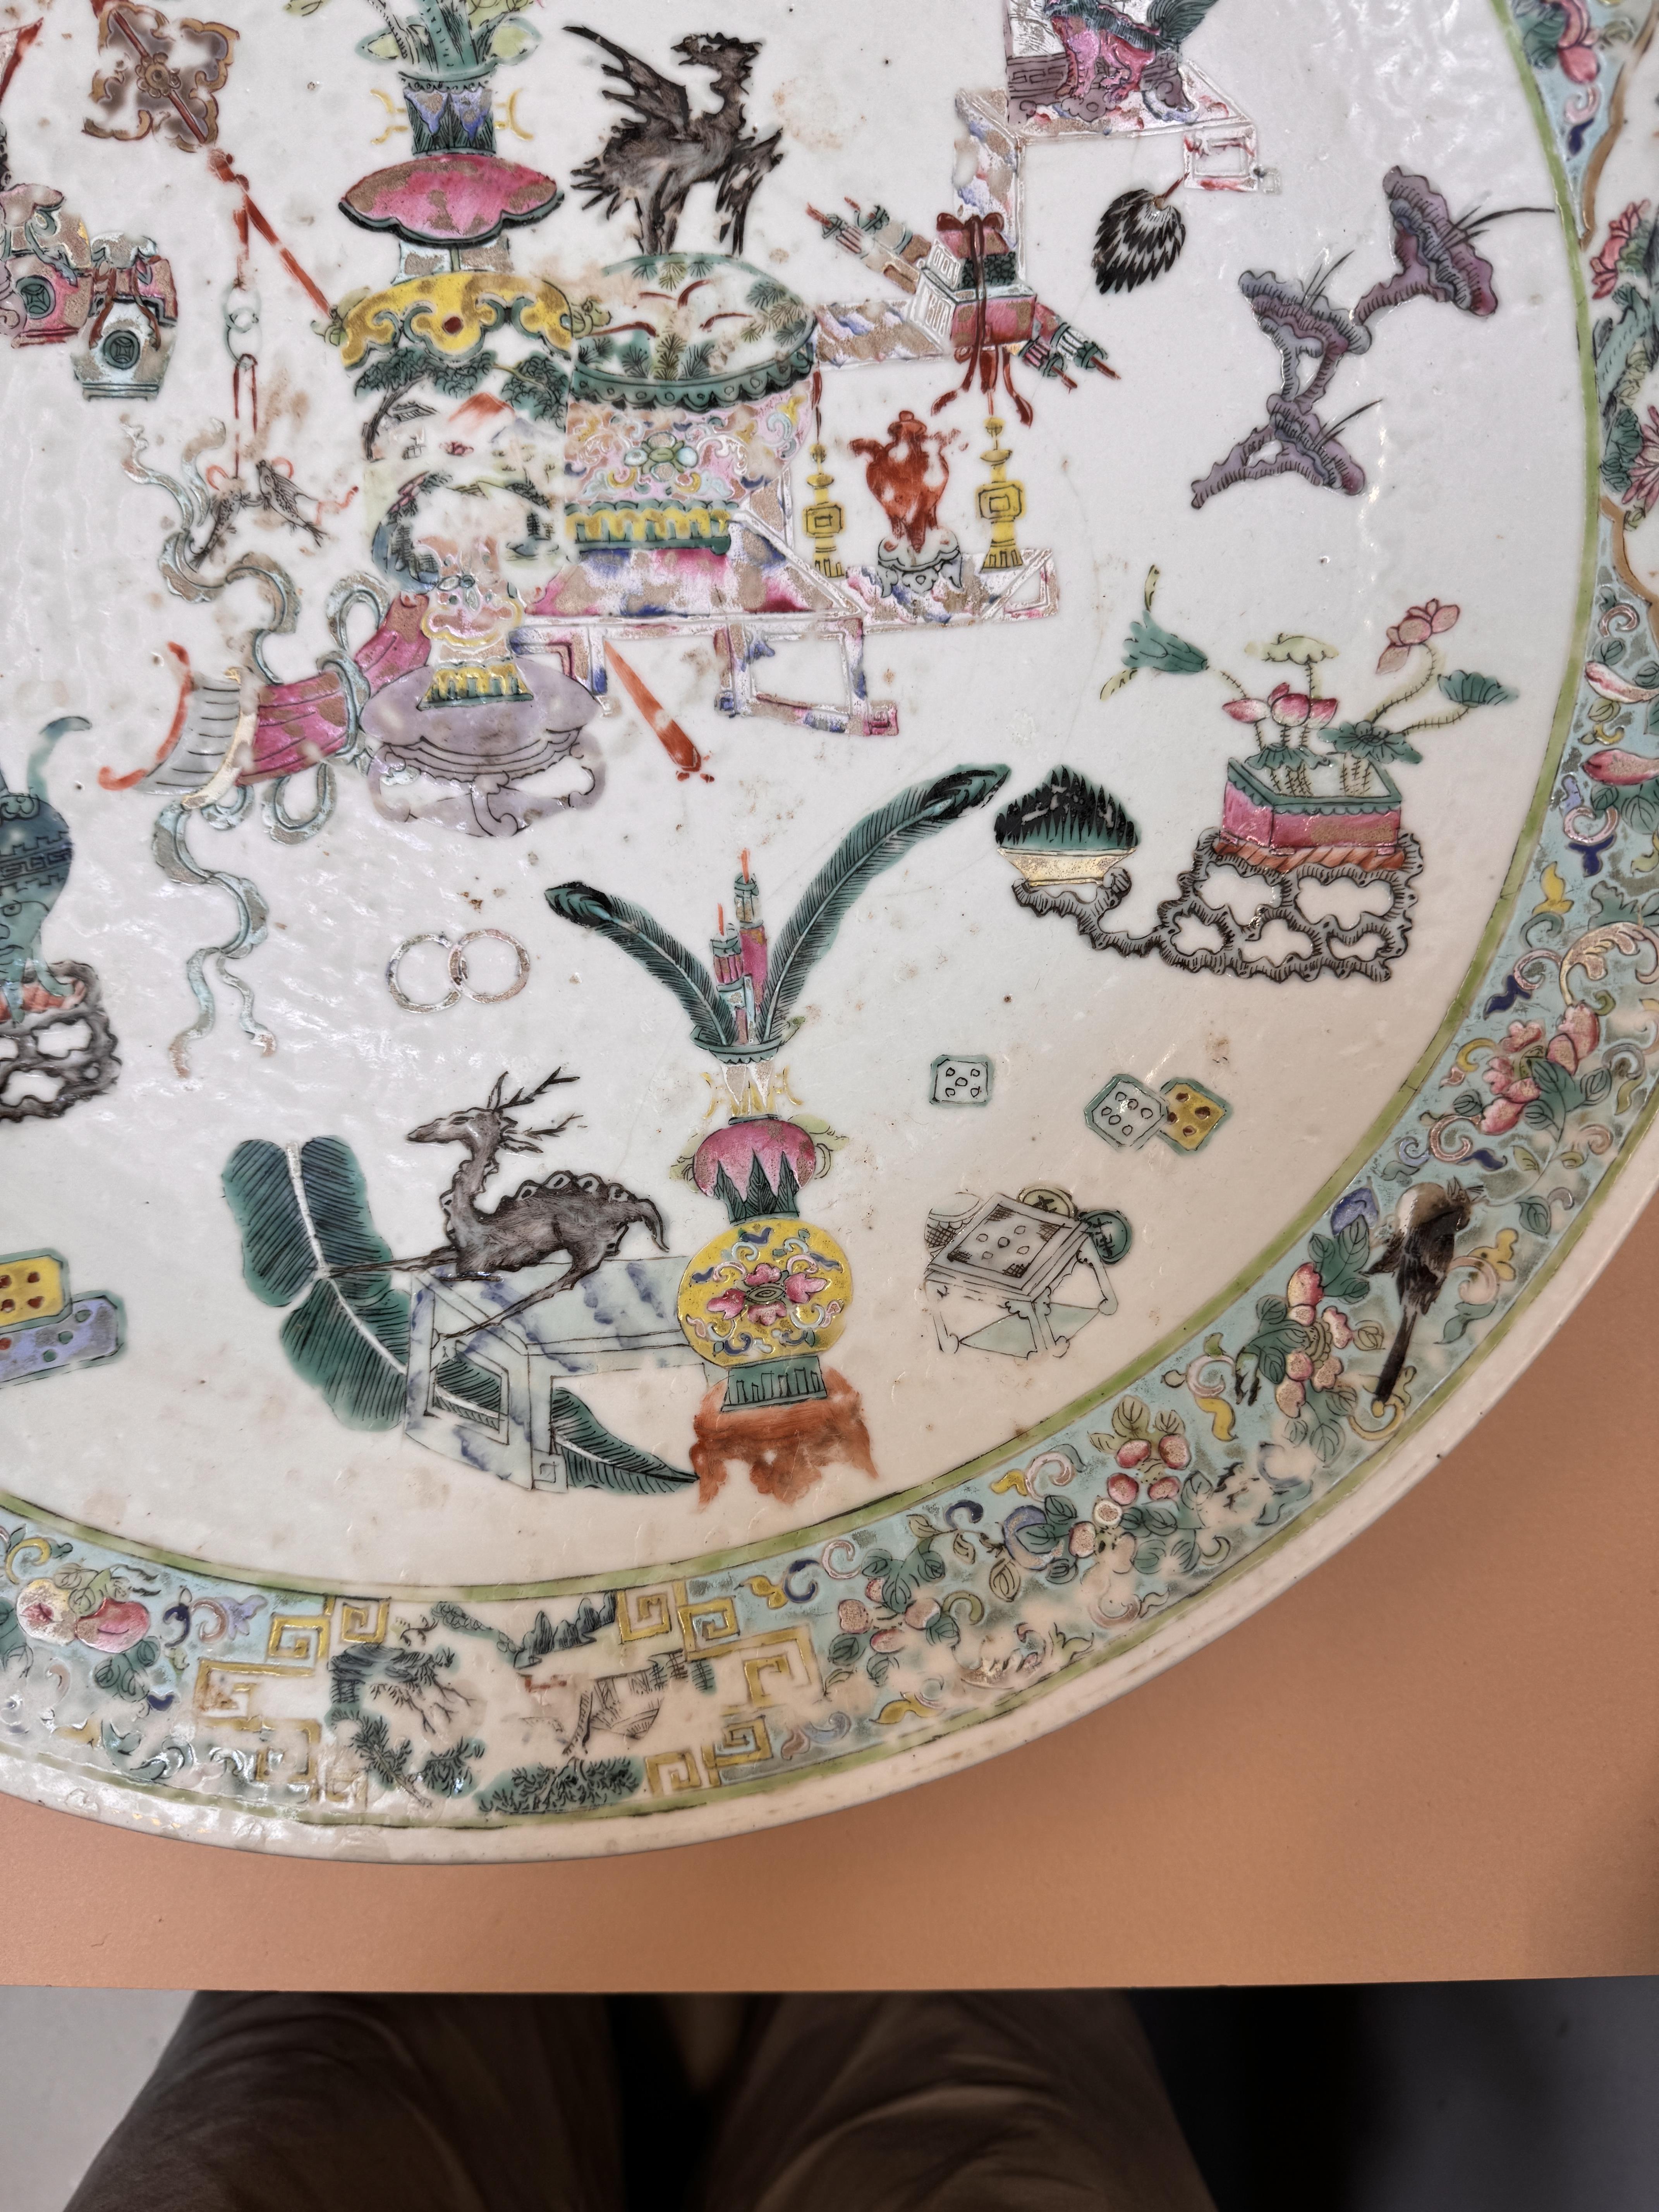 A LARGE CHINESE FAMILLE-ROSE 'HUNDRED ANTIQUES' CHARGER 清十九世紀 粉彩博古圖紋大盤 - Image 3 of 15